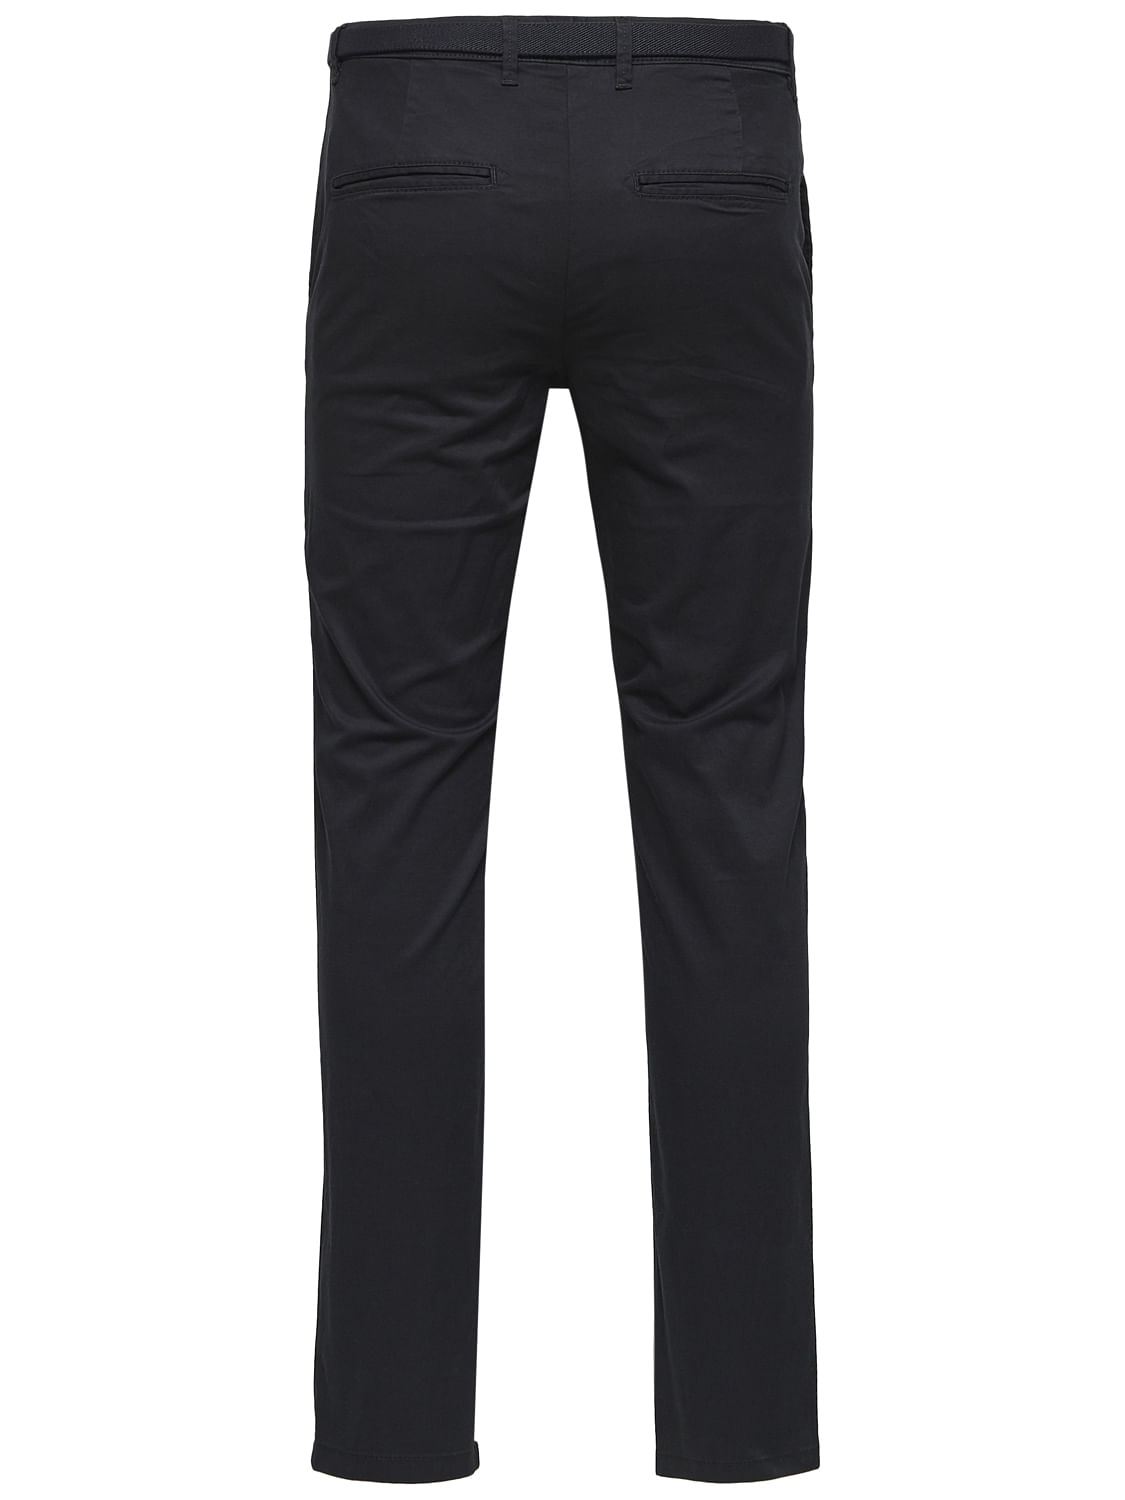 Buy Black Chino Pants for Men at SELECTED HOMME 194862201